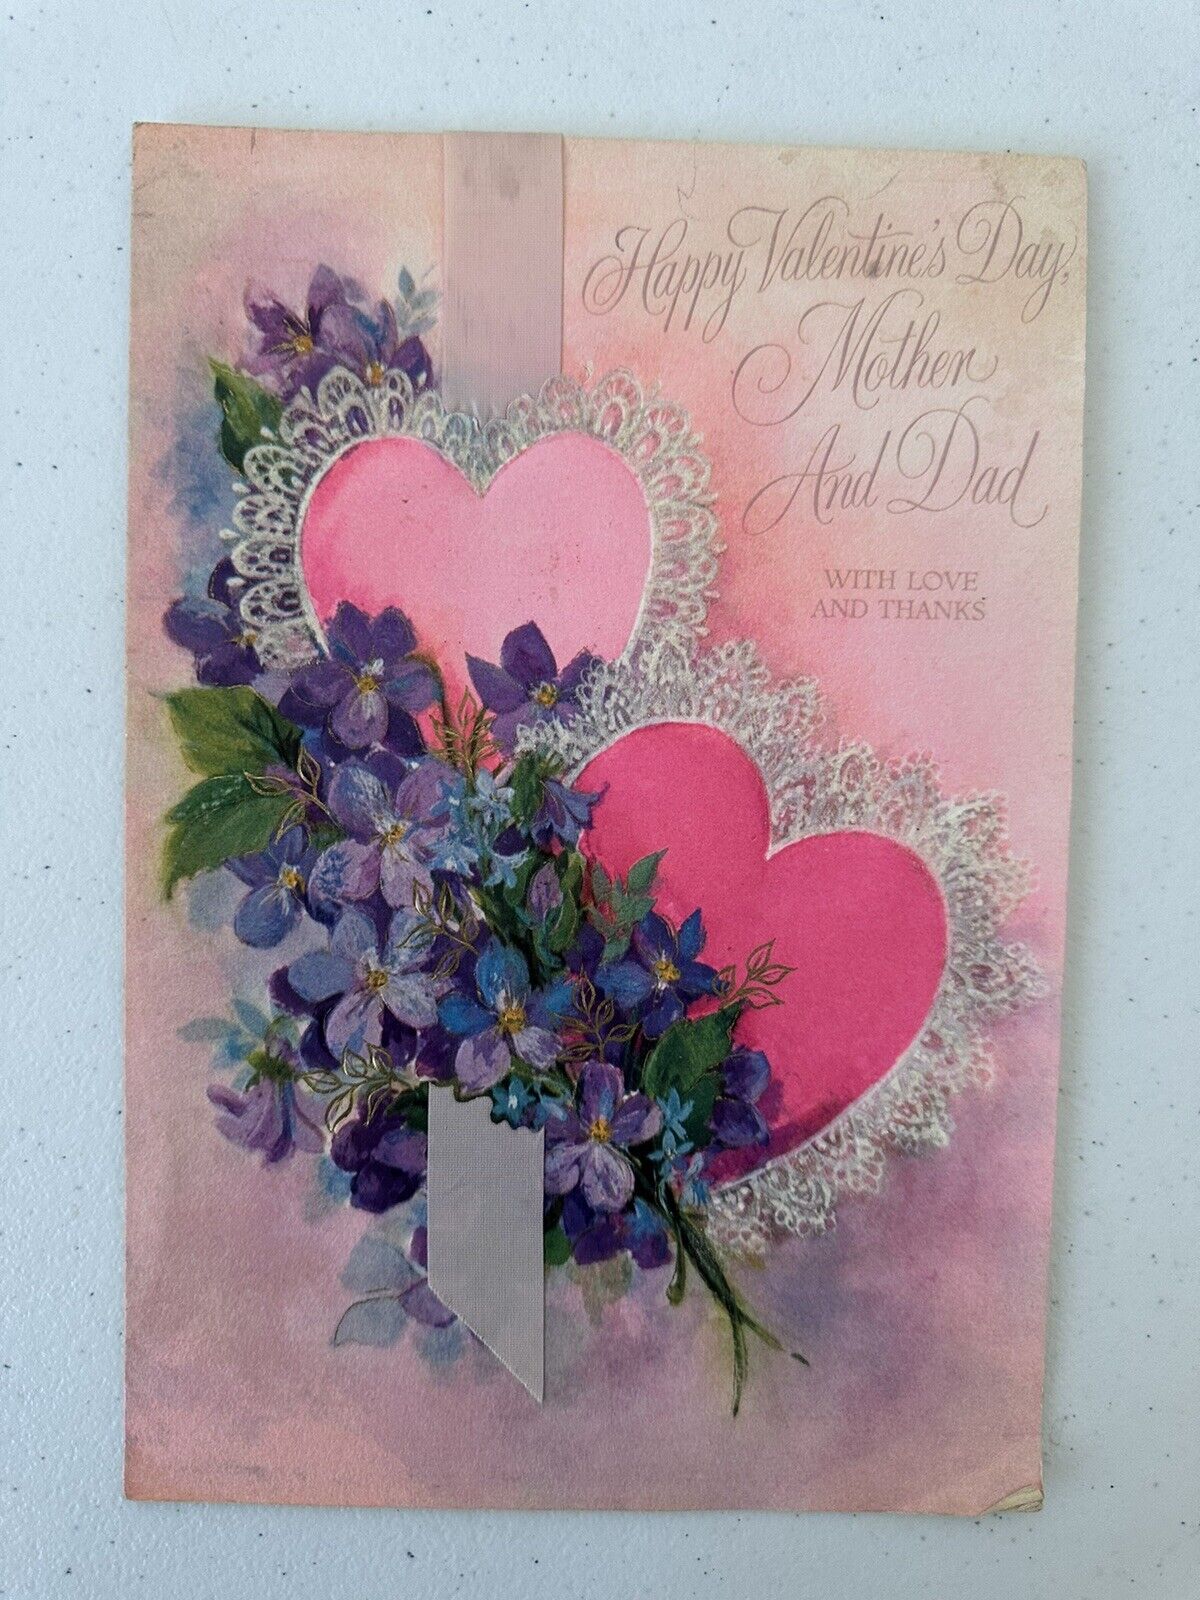 Vintage Charm Set of 4 Greeting Cards from the 60s and 70s - Valentine's Day, St. Patrick's Day, & New Baby - TreasuTiques